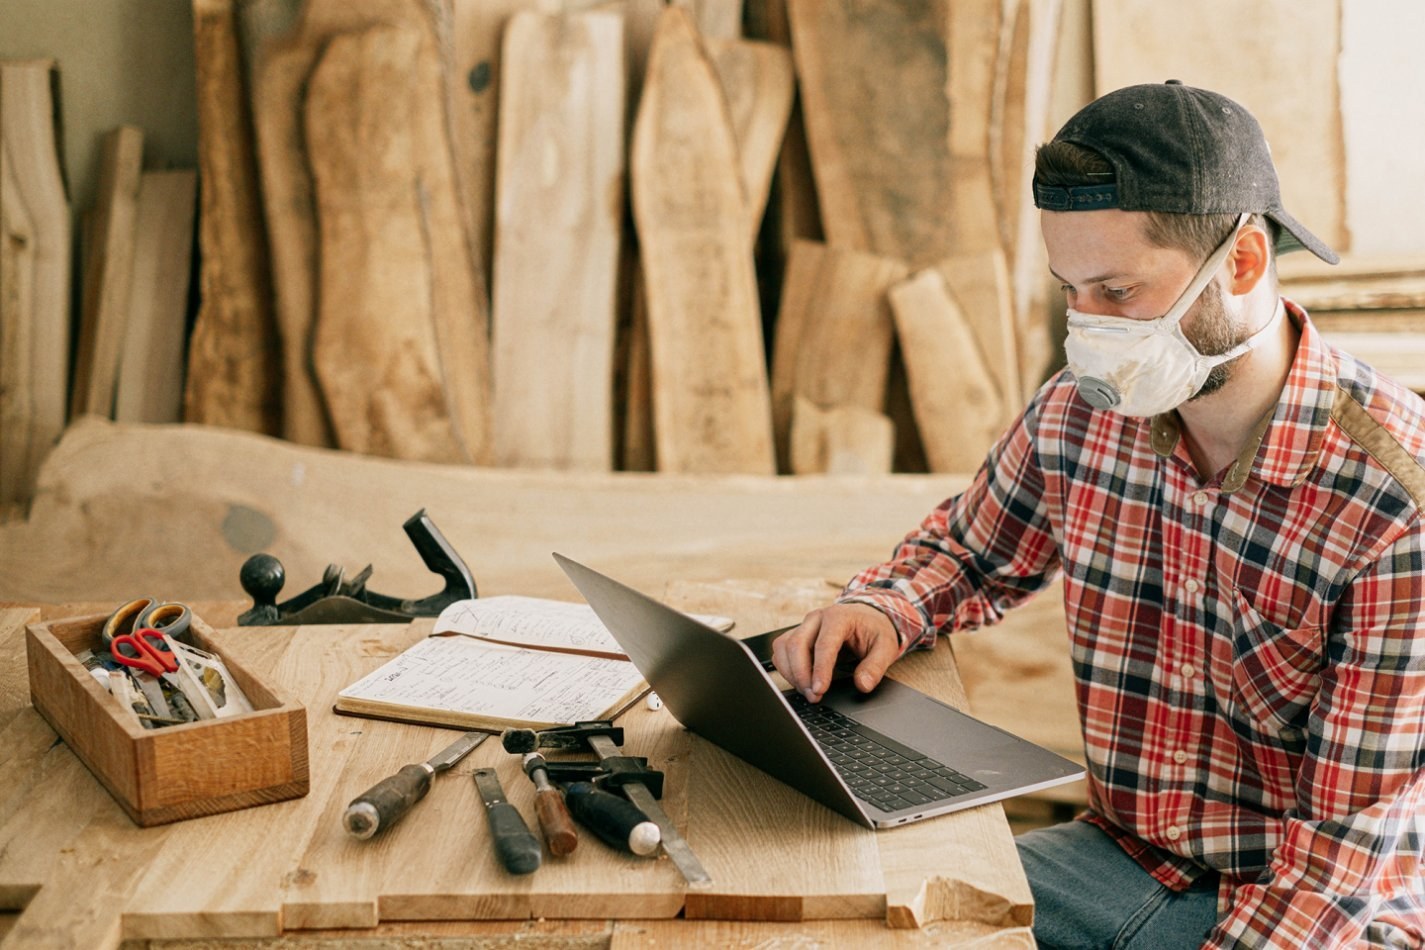 Person working on laptop in wood shop